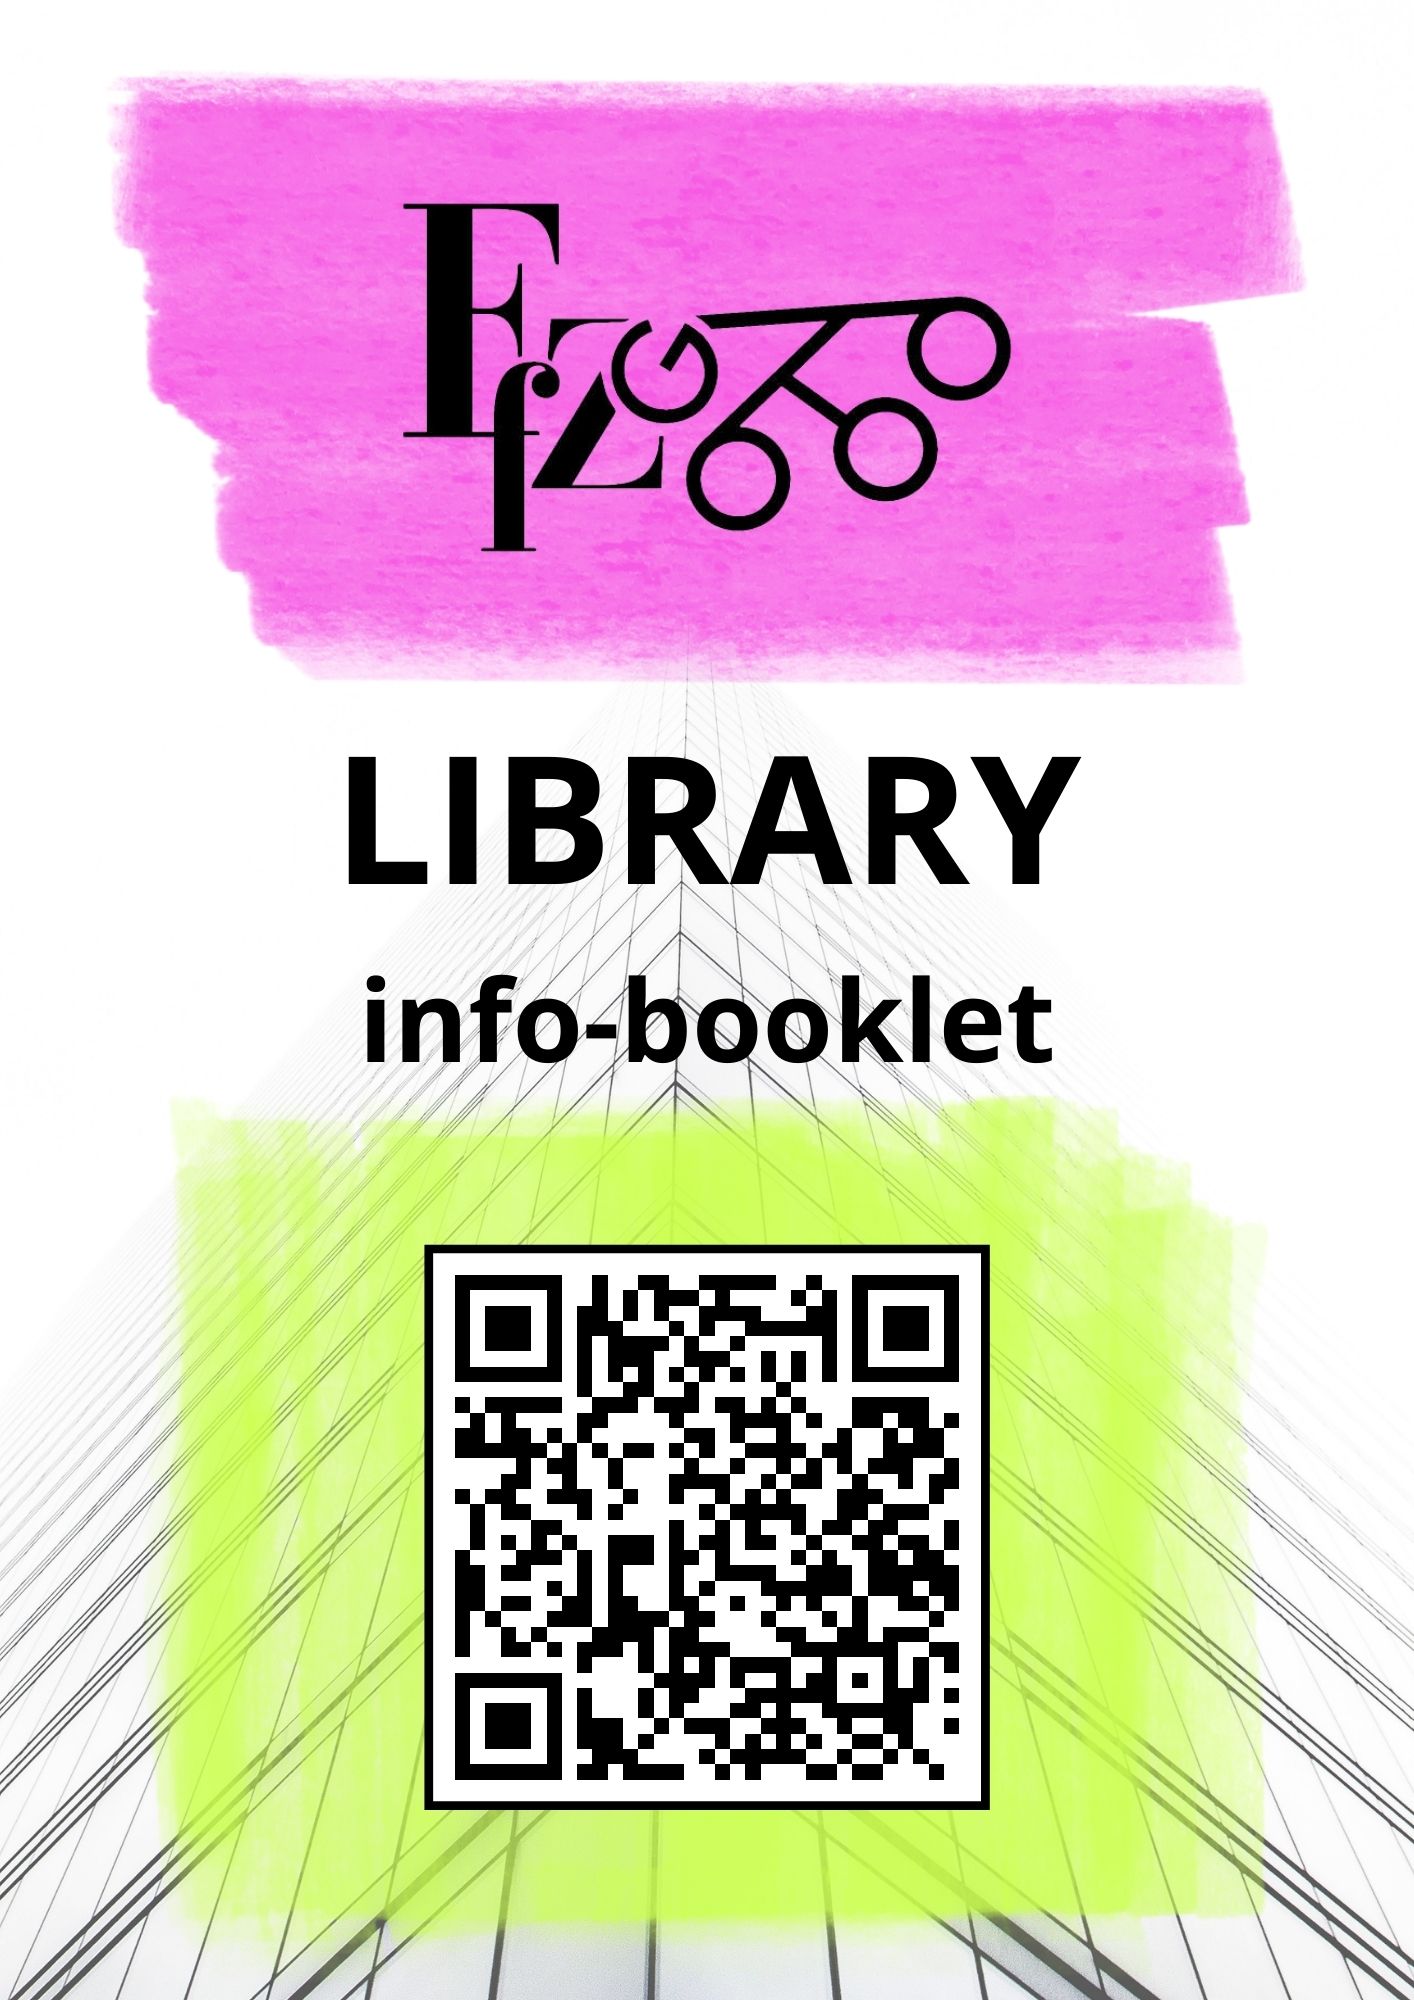 info-booklet-library